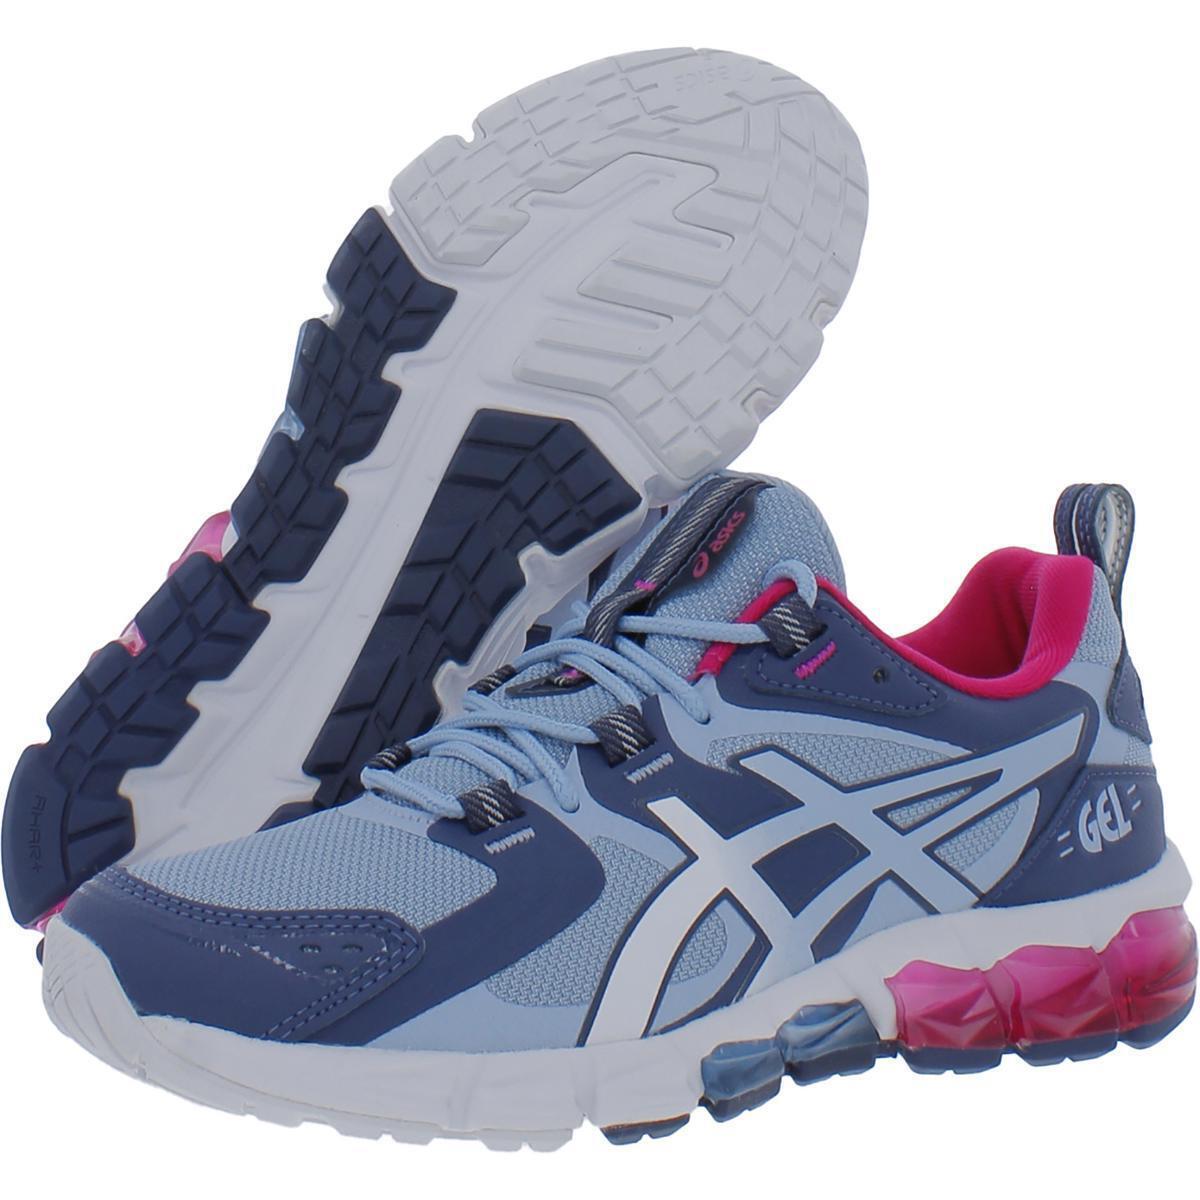 Asics Womens Gel-quantum 180 6 Gym Fitness Running Shoes Sneakers Bhfo 8632